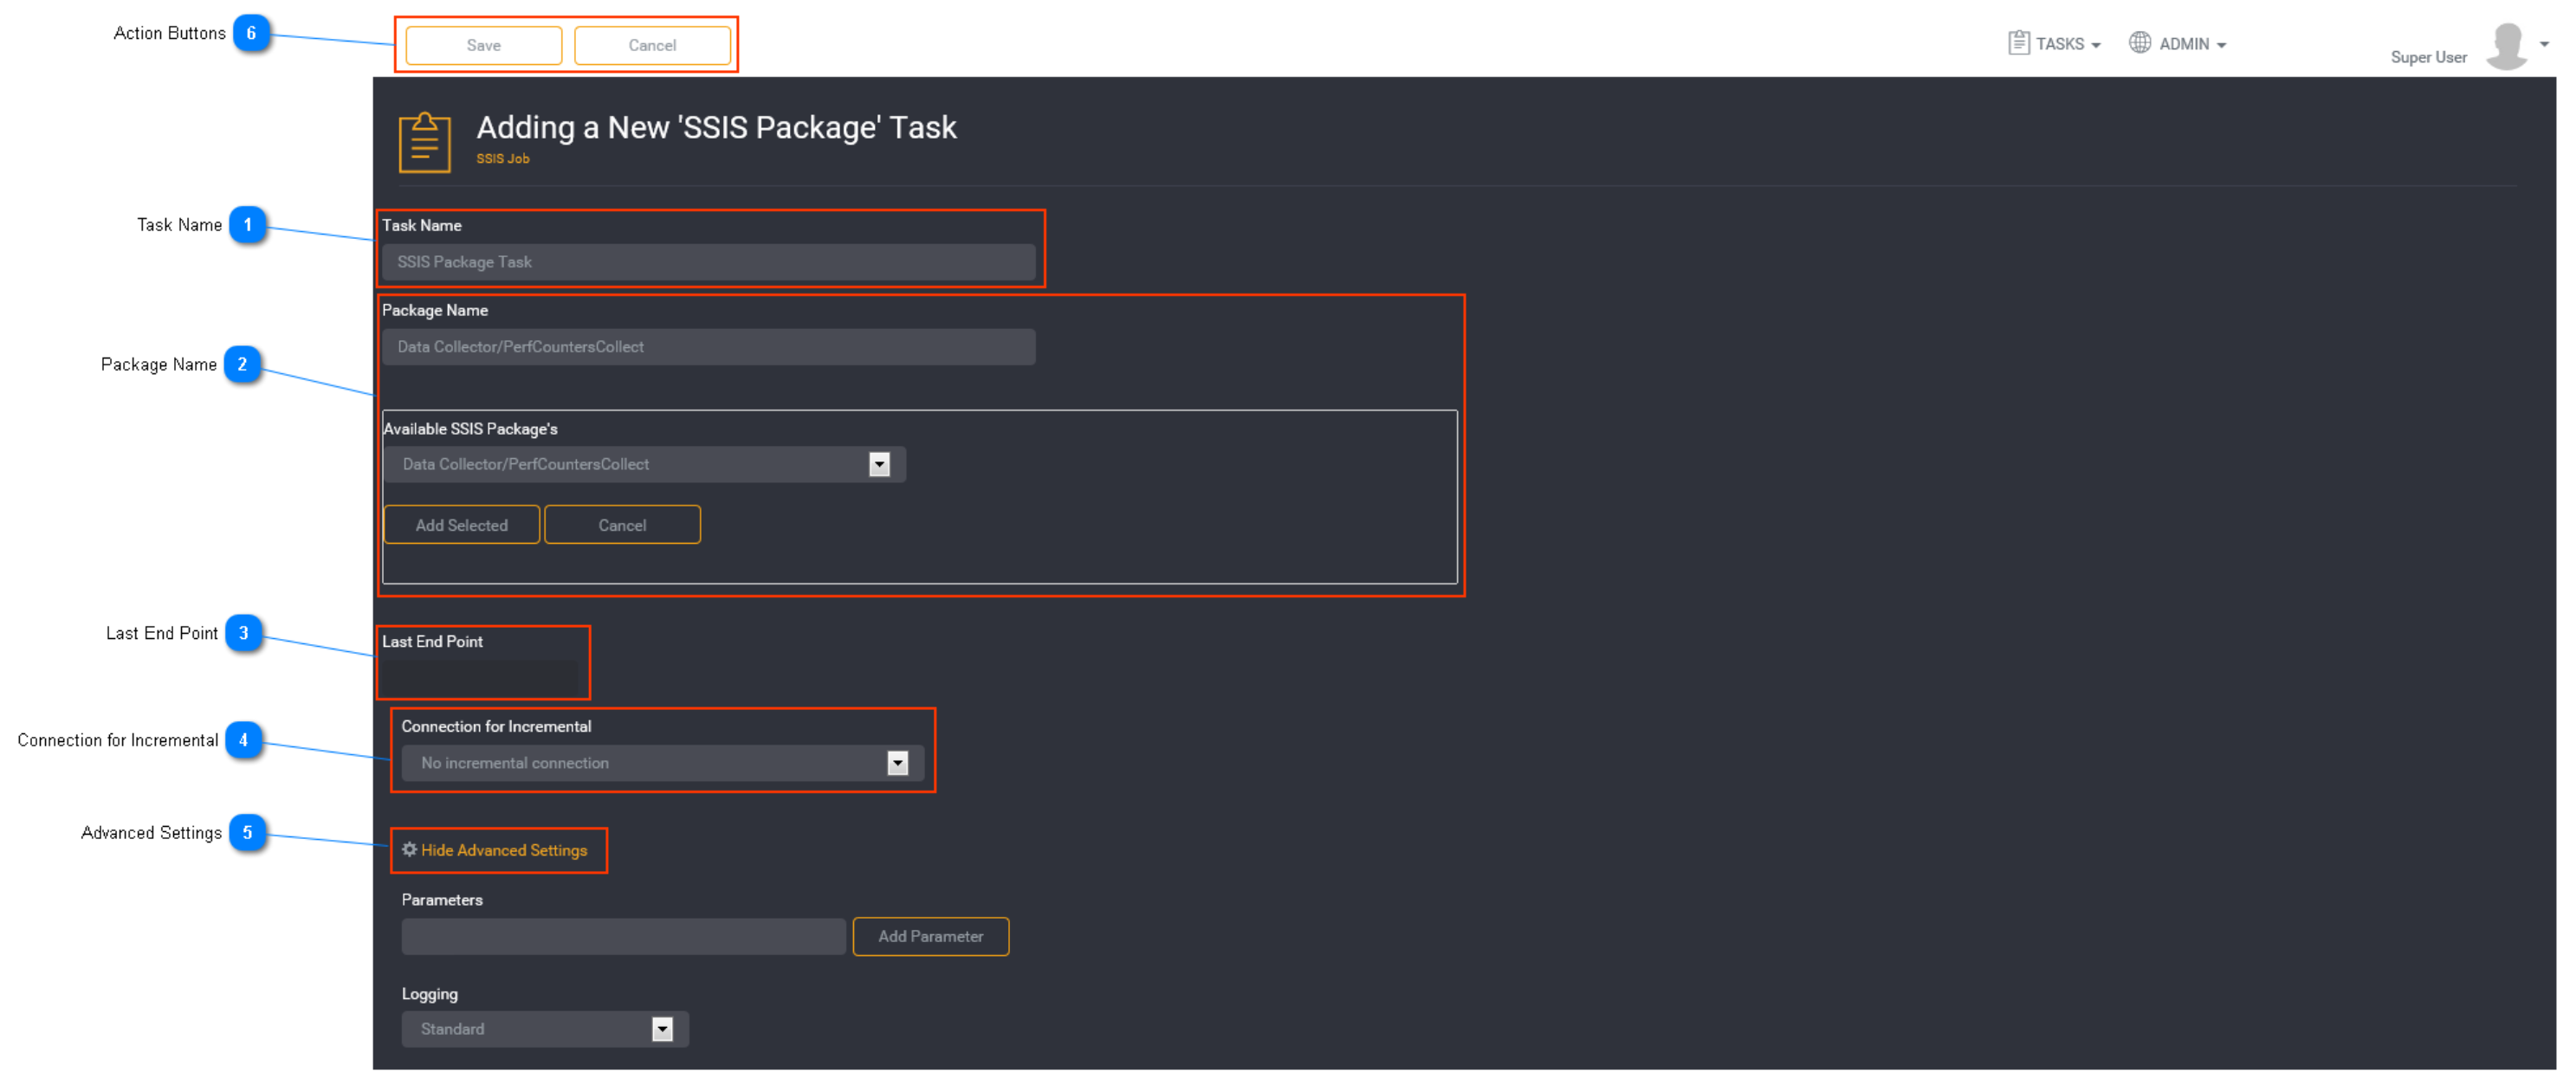 Adding a SSIS Package task